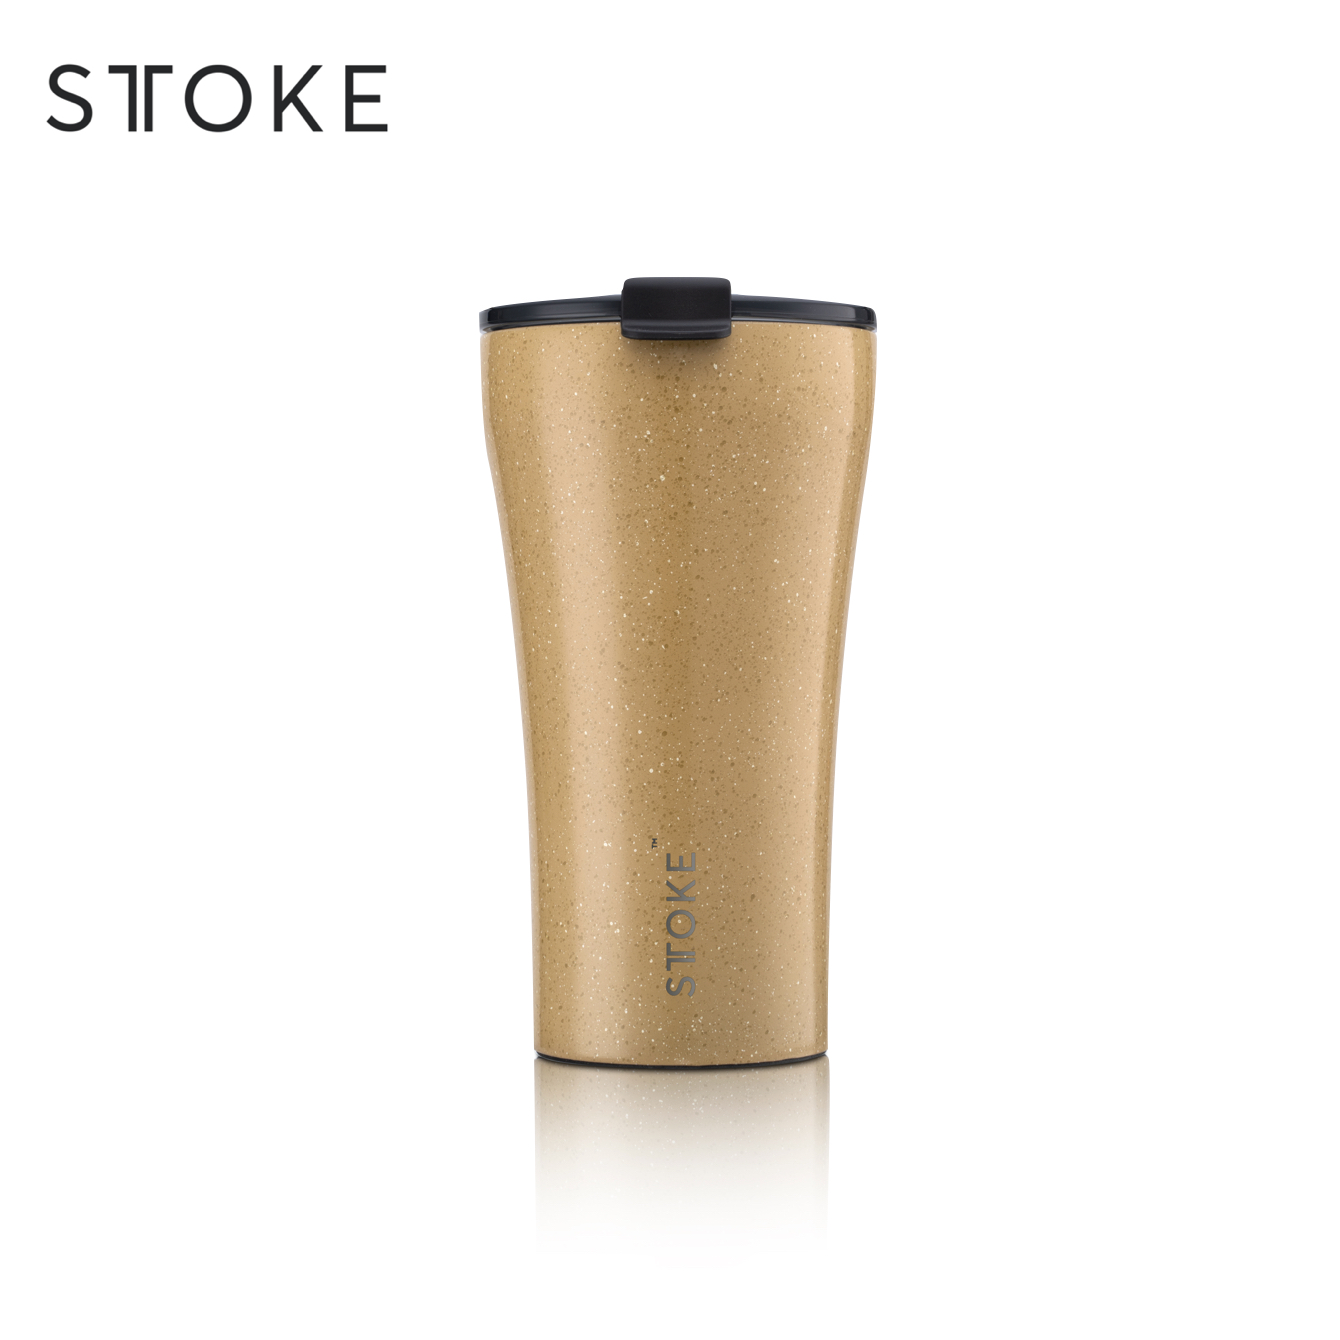 Sttoke Leakproof Ceramic Cup 16 oz - Yellow Stone